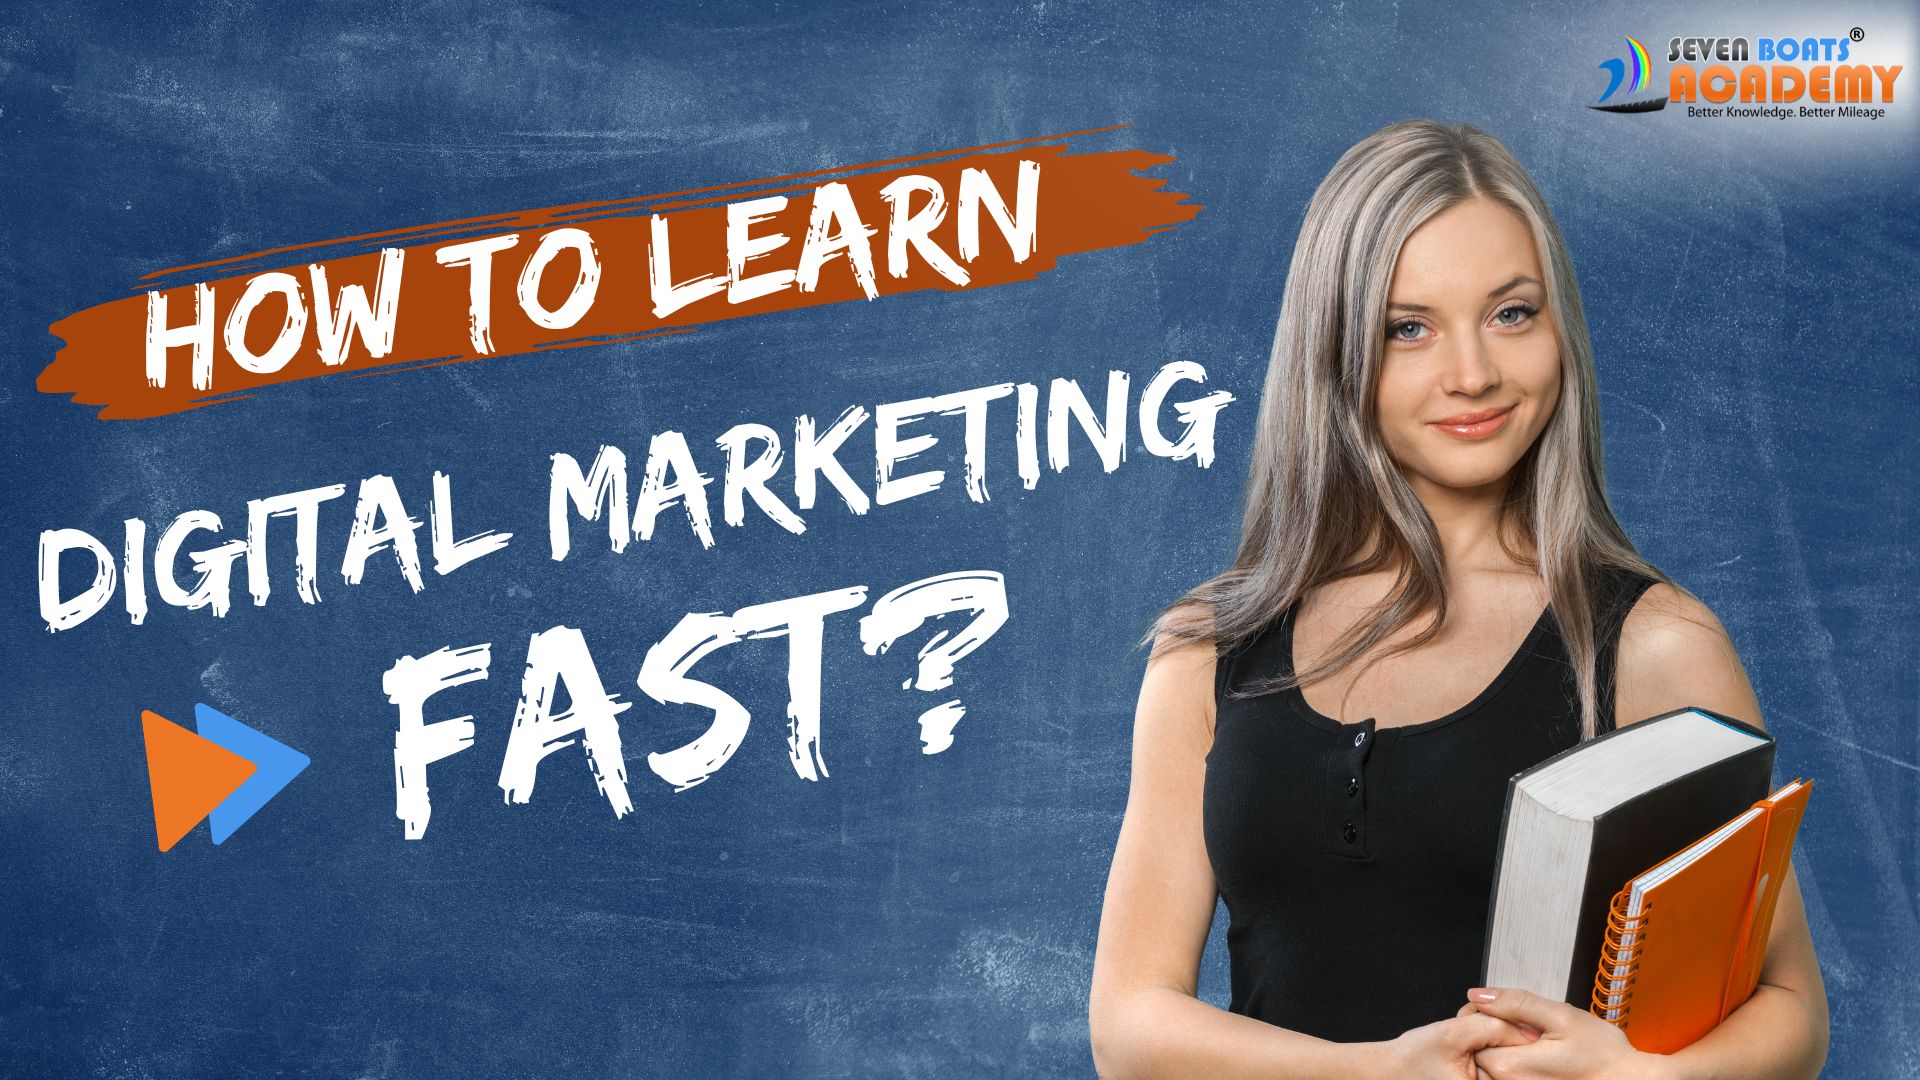 How to Learn Digital Marketing Fast